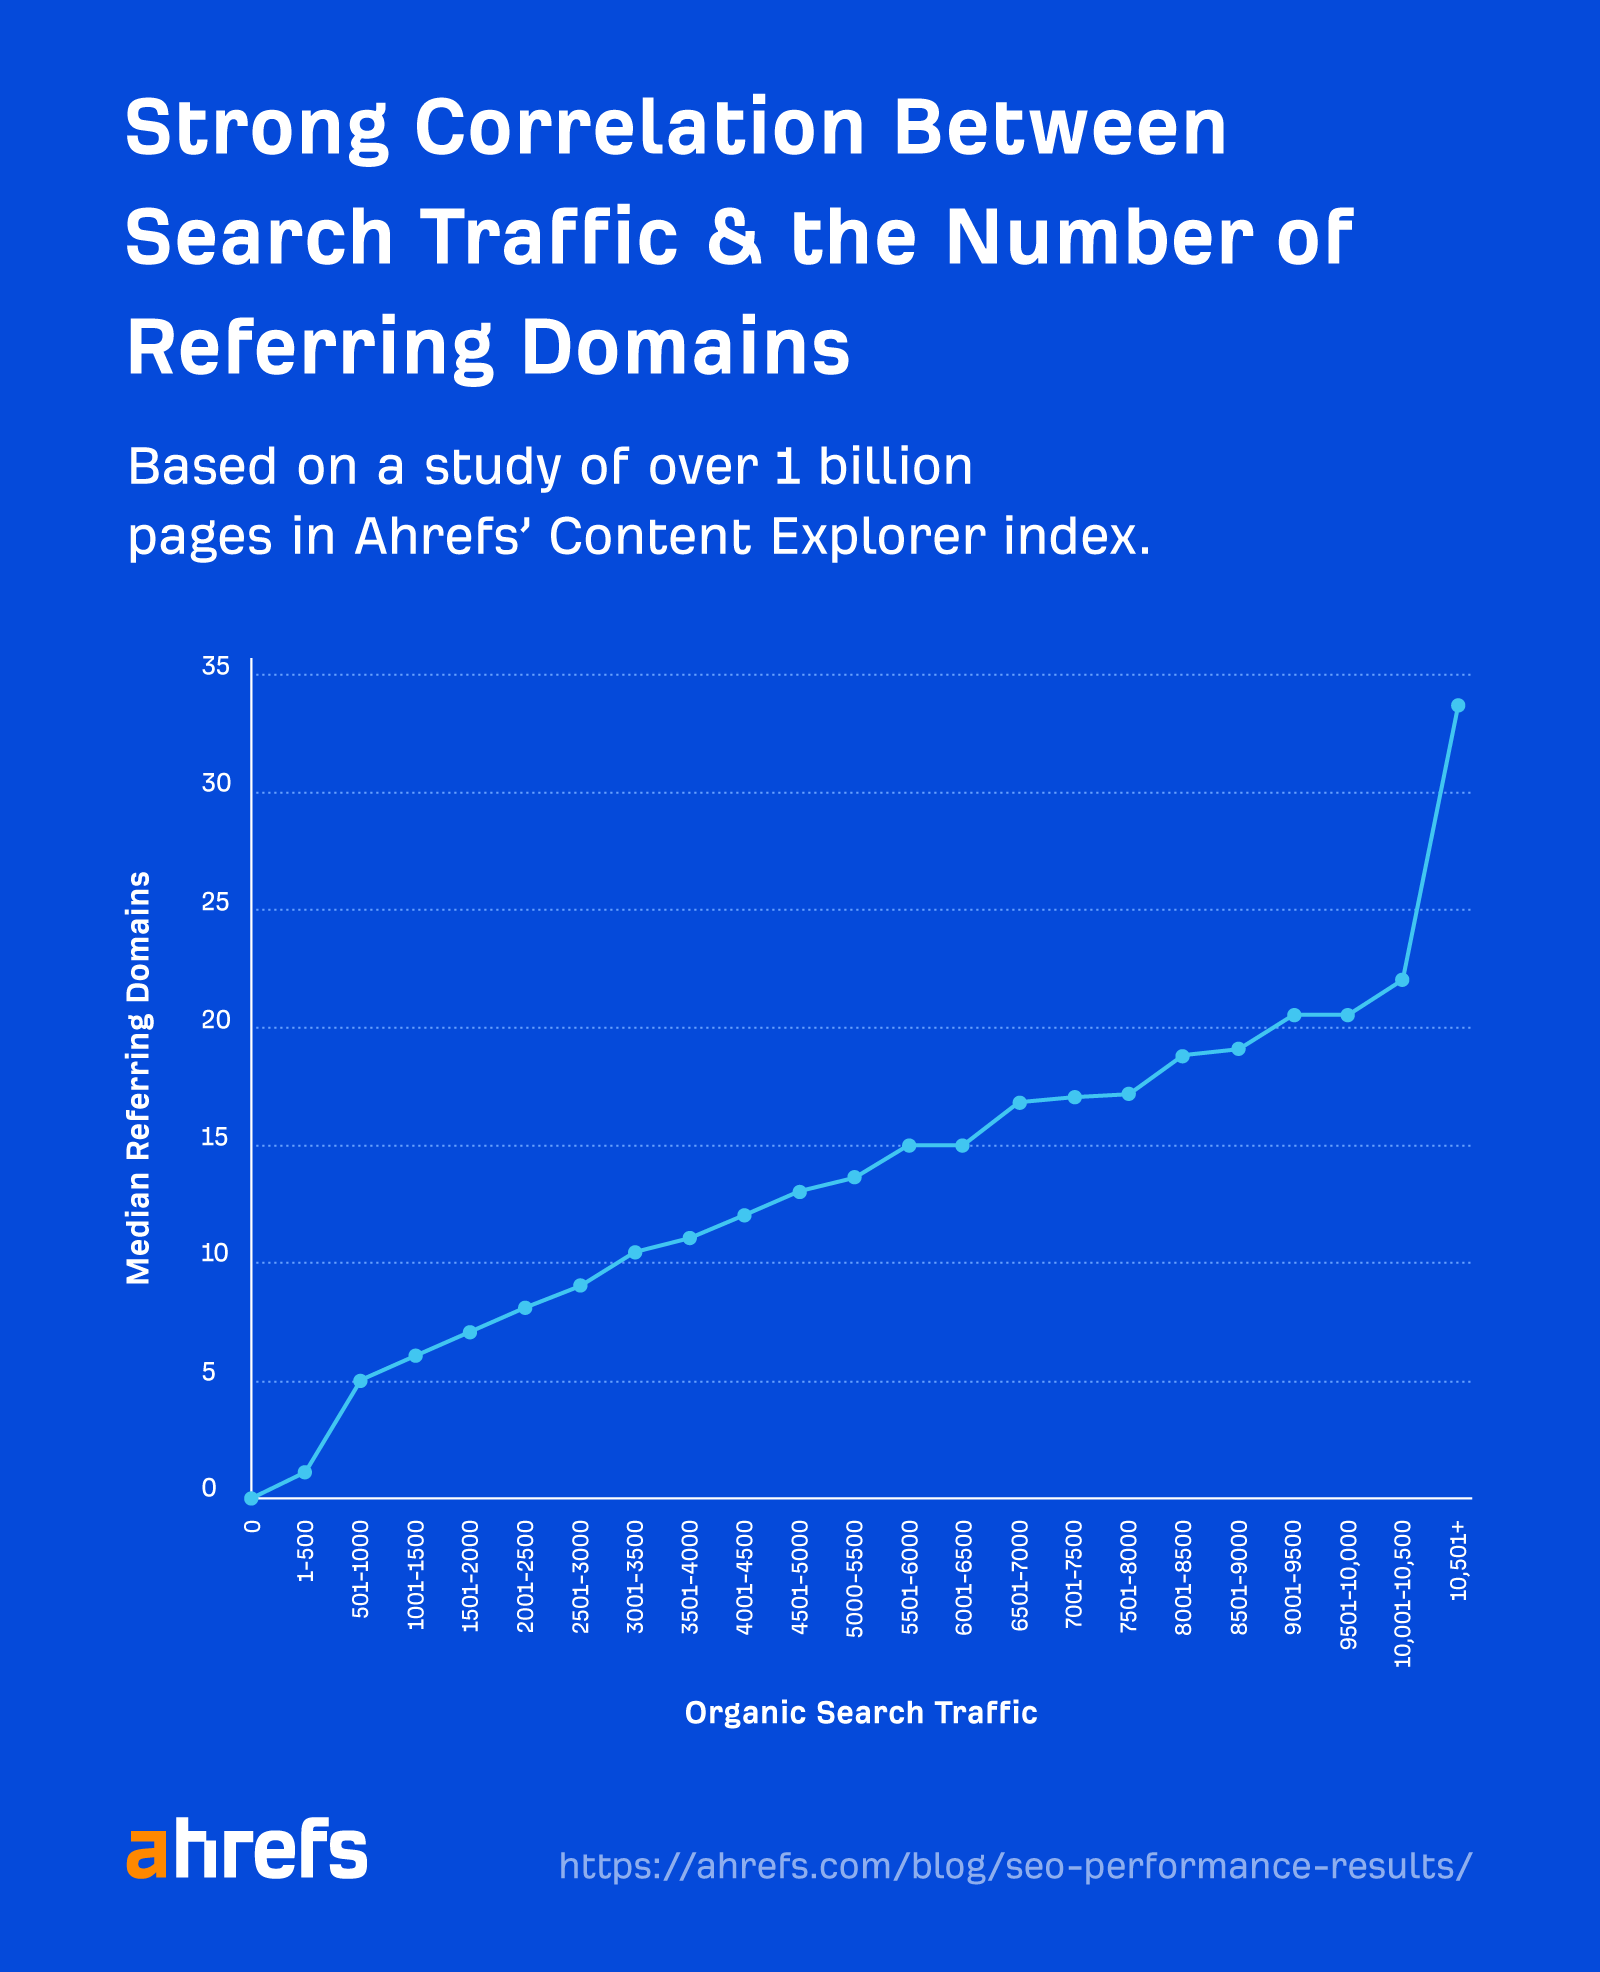 Line graph showing strong correlation between search traffic and the number of referring domains